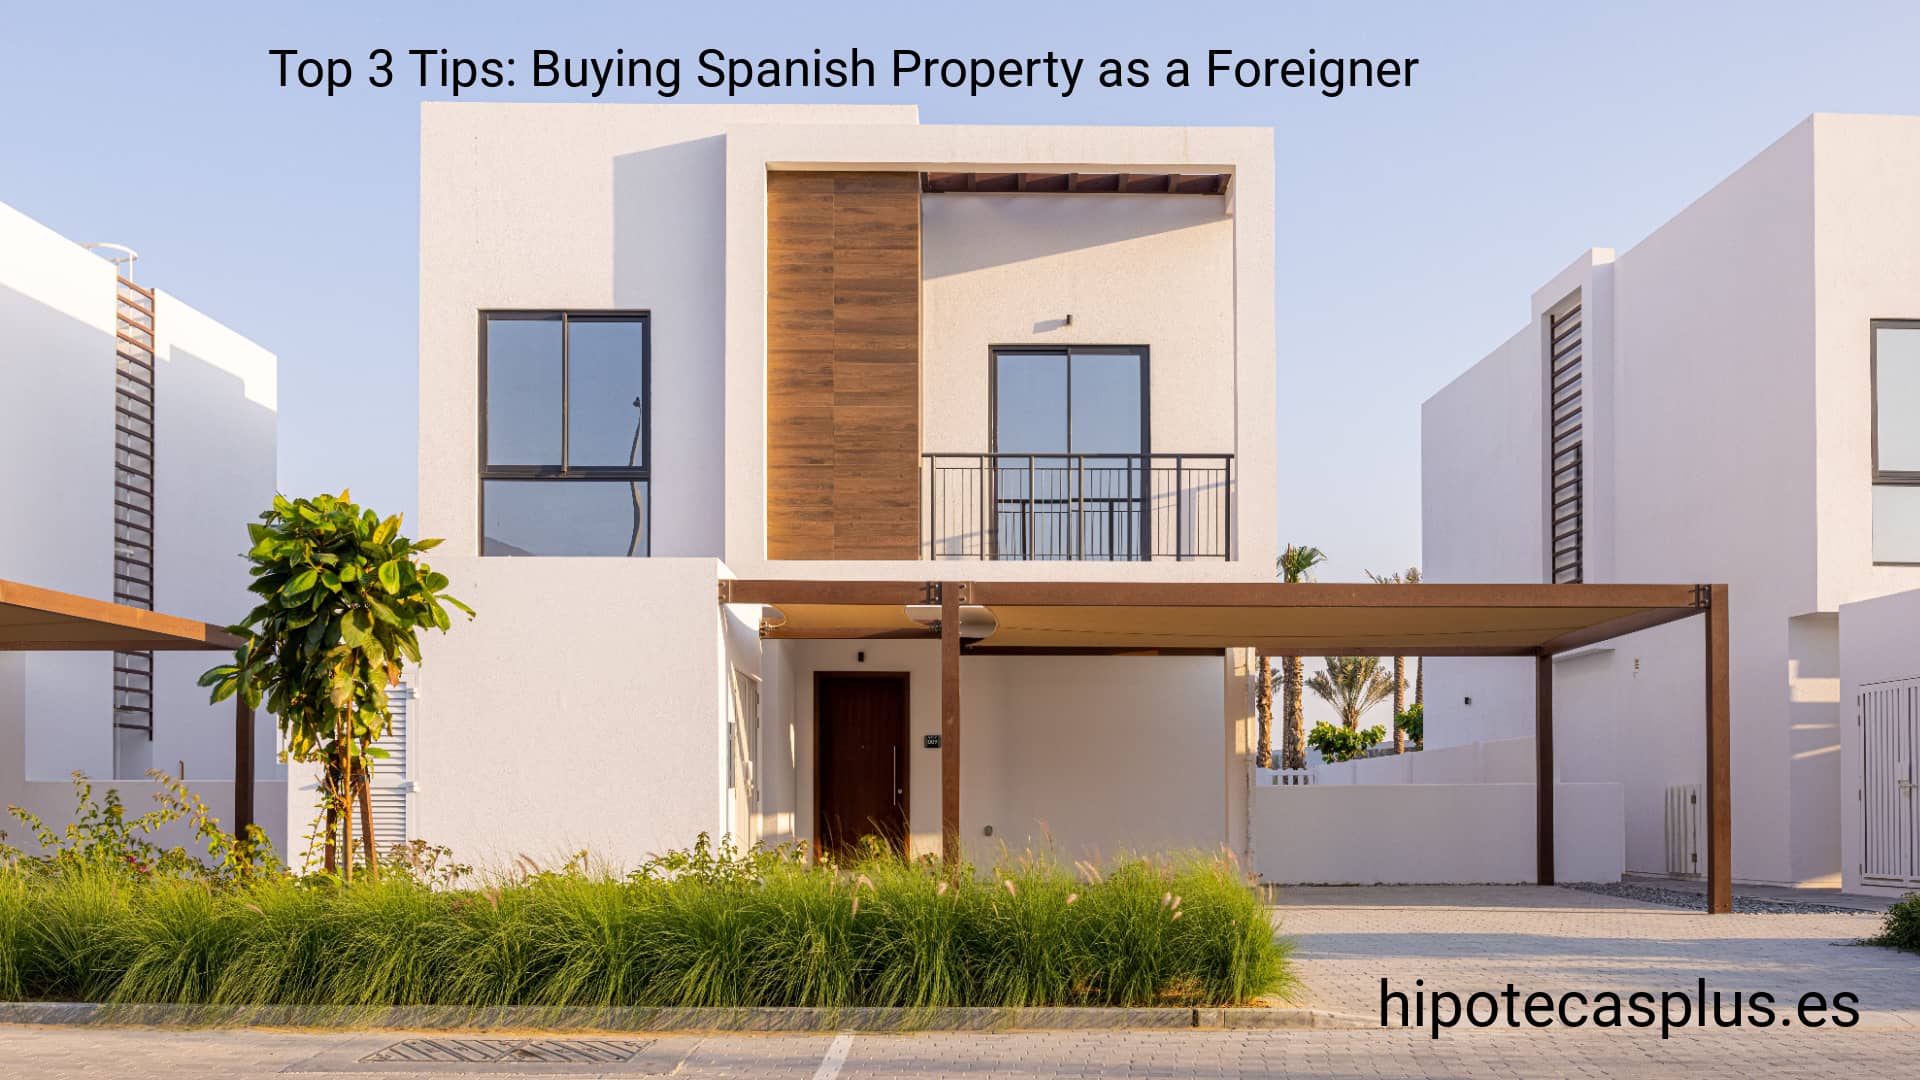 https://www.hipotecasplus.es/wp-content/uploads/Top-3-Tips-Buying-Spanish-Property-as-a-Foreigner-Without-Overpaying.jpg